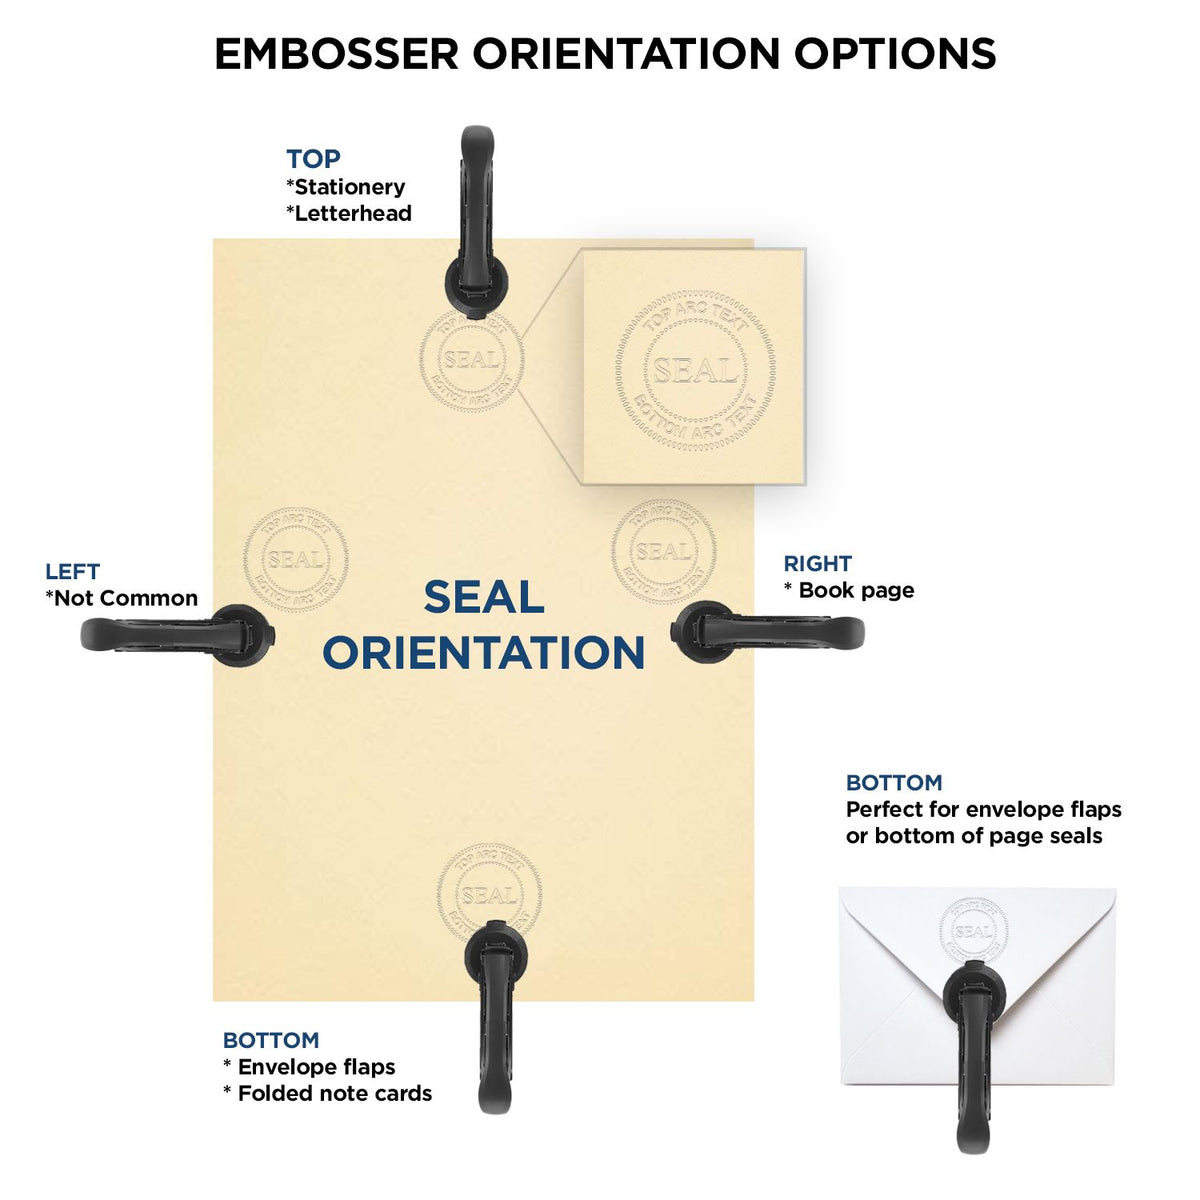 An infographic for the State of Maryland Long Reach Architectural Embossing Seal showing embosser orientation, this is showing examples of a top, bottom, right and left insert.